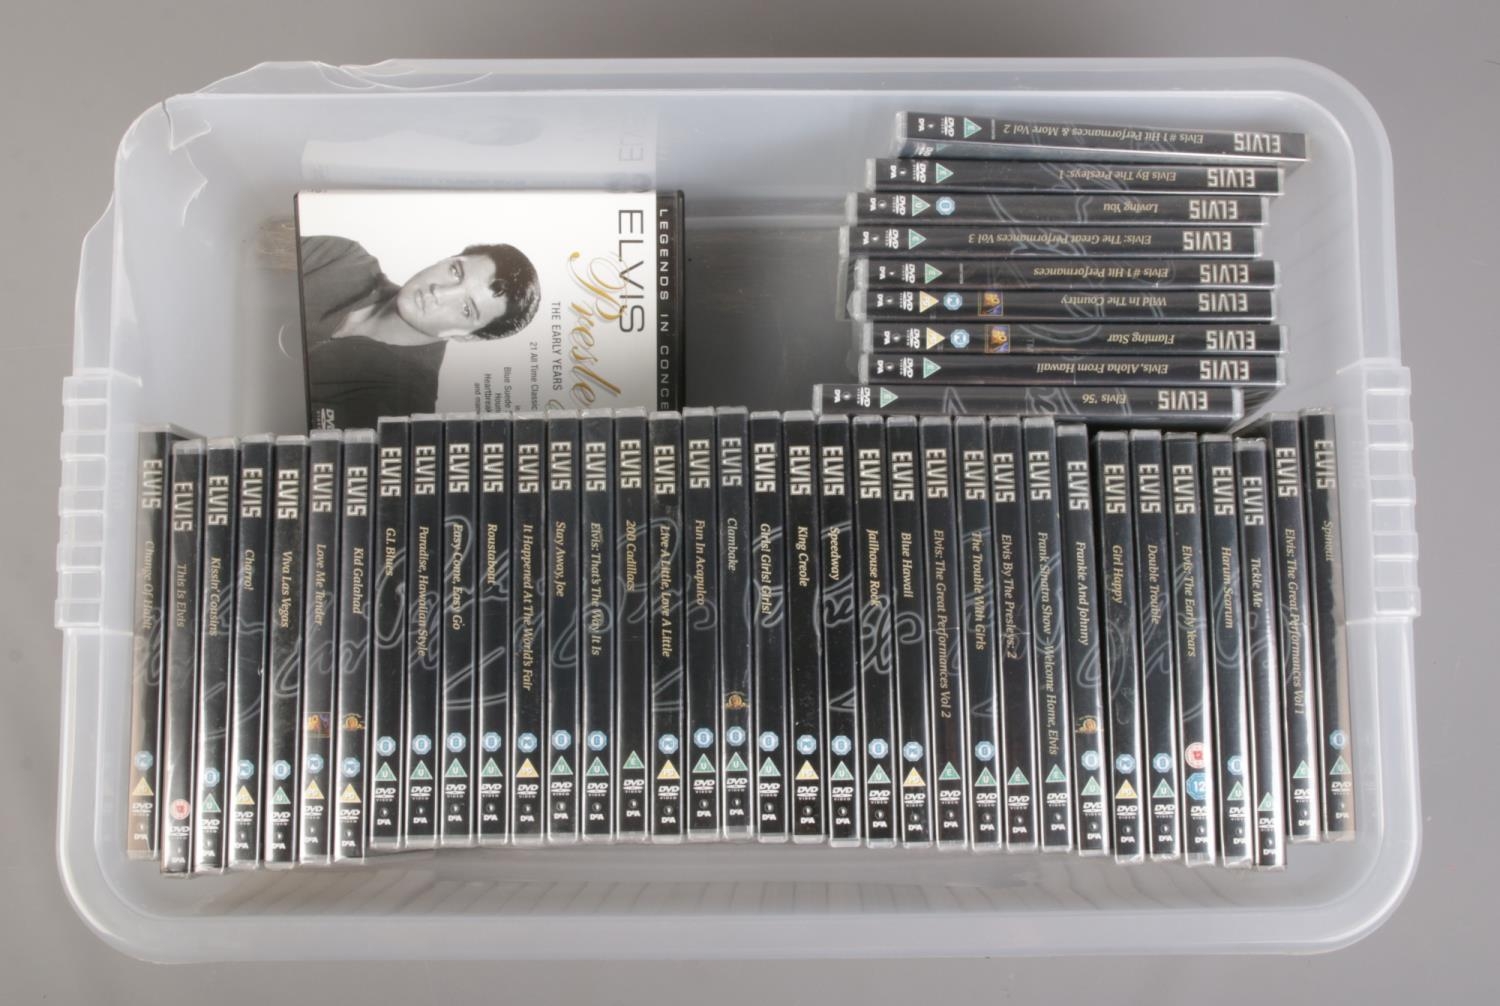 Elvis Presley; a 44 DeAgostini film collection. All in original polythene wrappers.